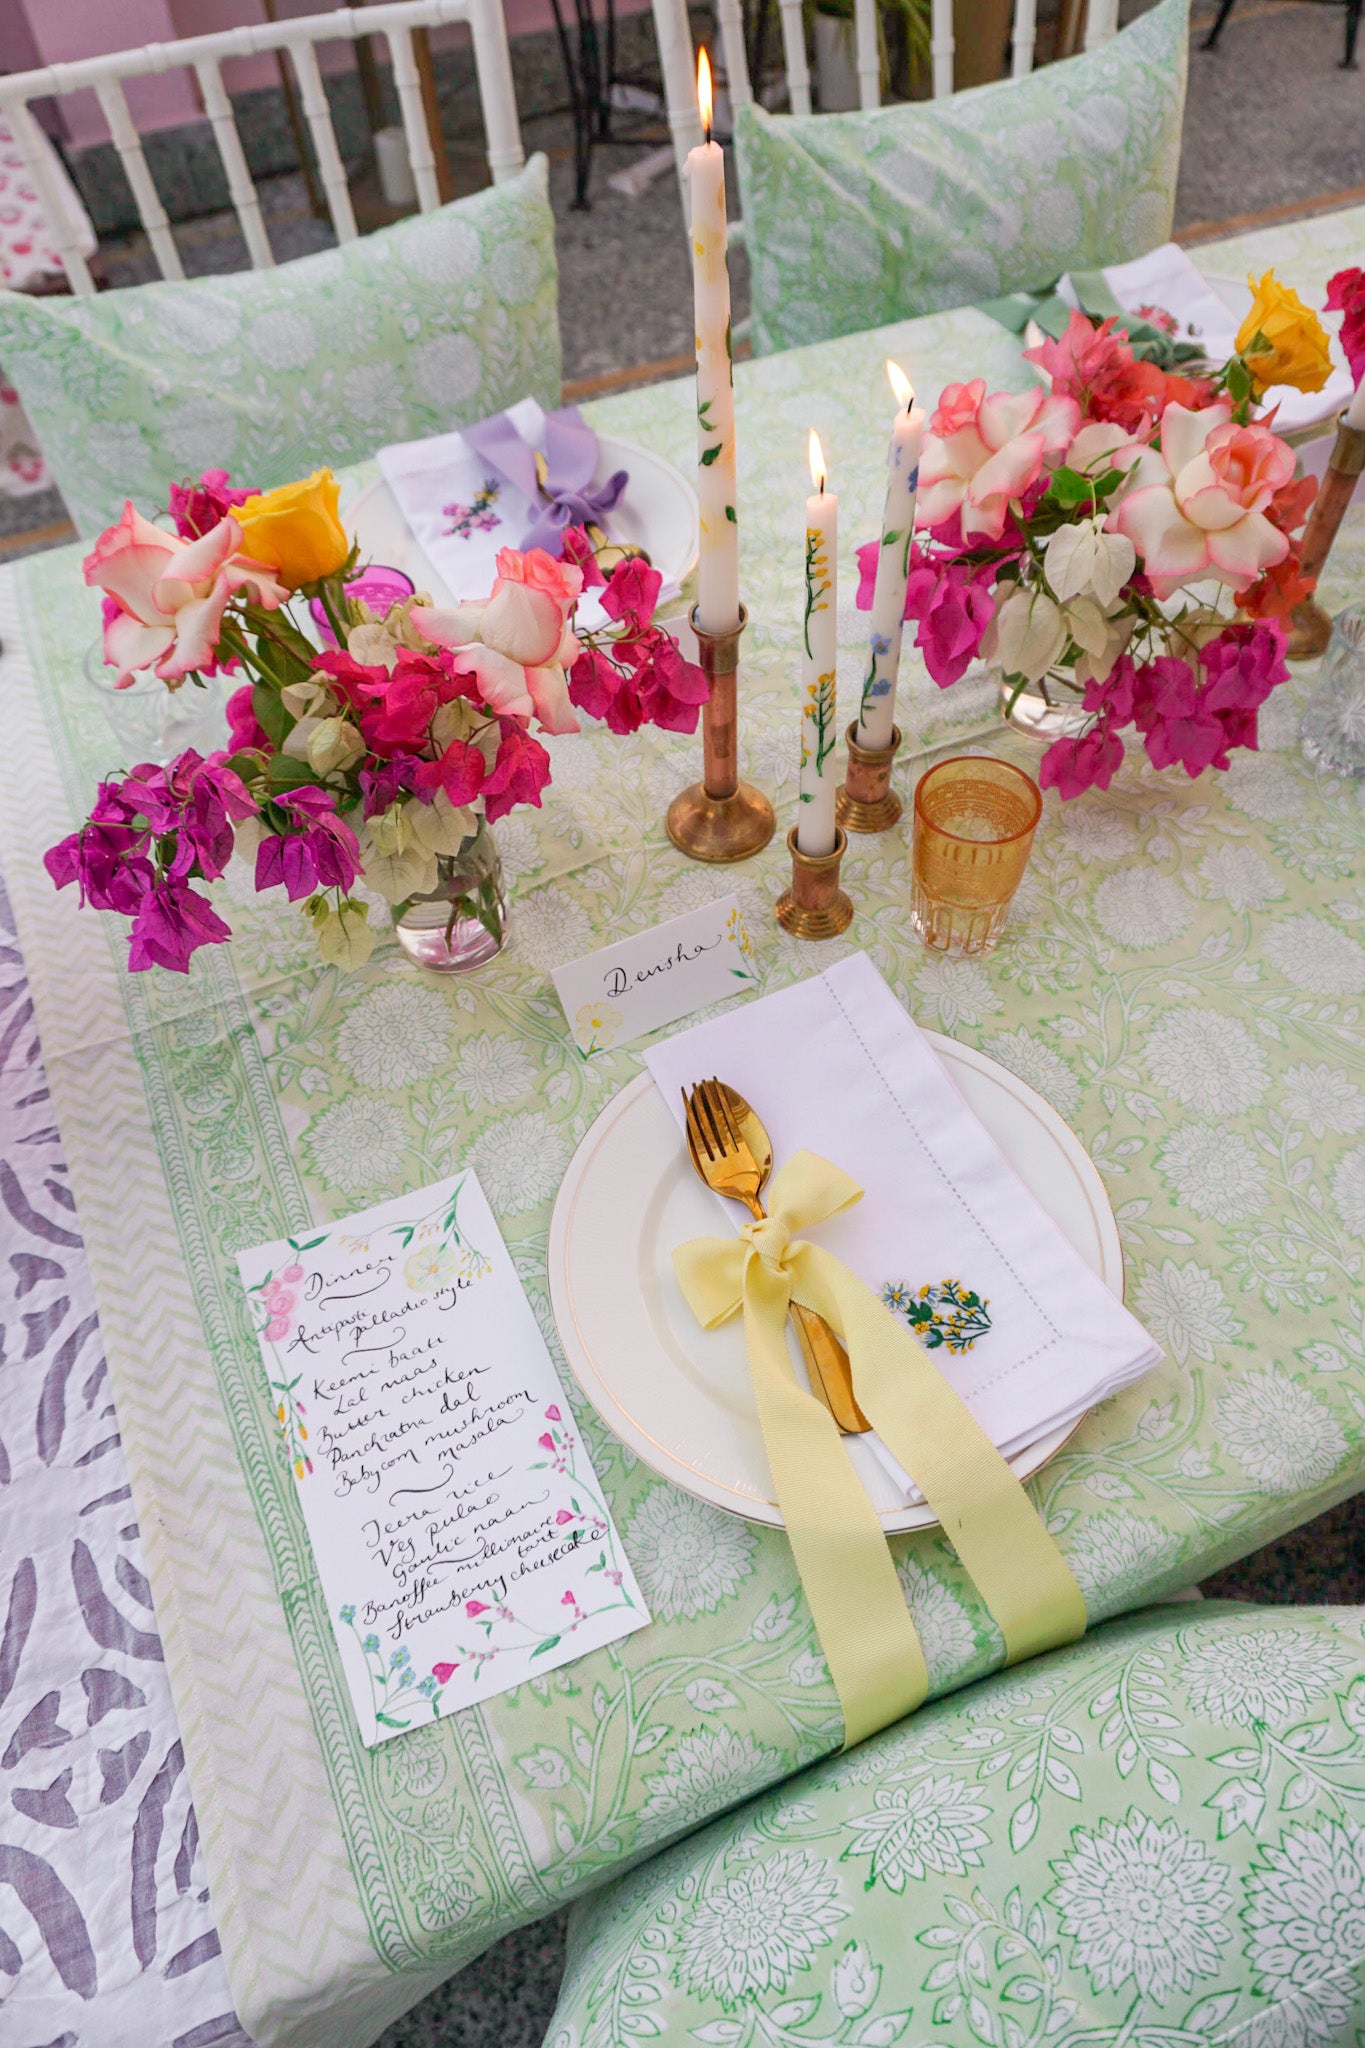 Details on a rainbow tablescape by Rosanna Falconer with floral embroidered napkin and block printed green tablecloth as well as a calligraphy menu